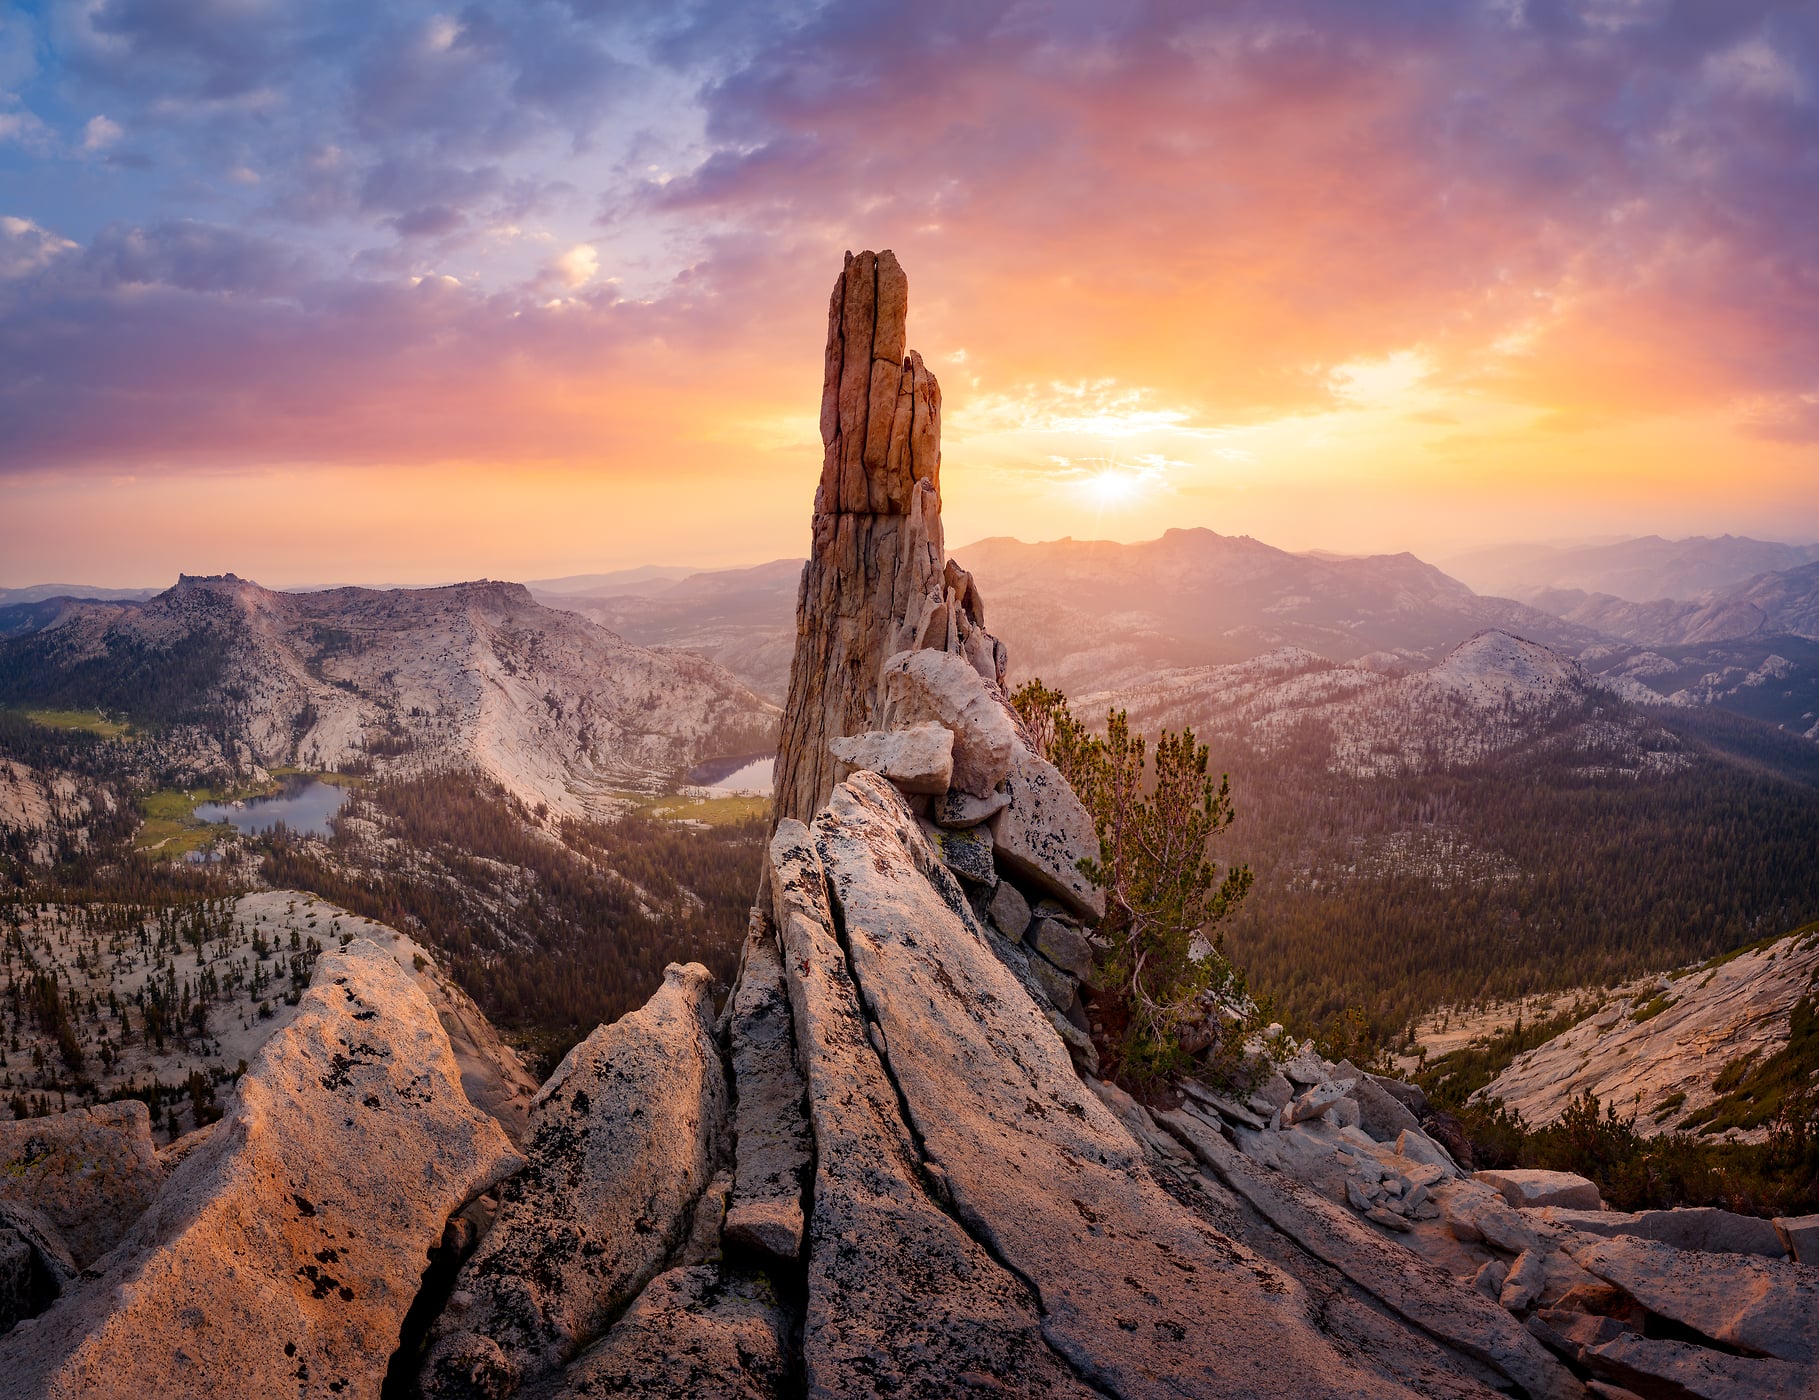 183 megapixels! A very high resolution, large-format VAST photo print of an inspirational scene with rock formation, sunset, mountains, lakes, and a valley; landscape photograph created by Jeff Lewis in Yosemite National Park, California